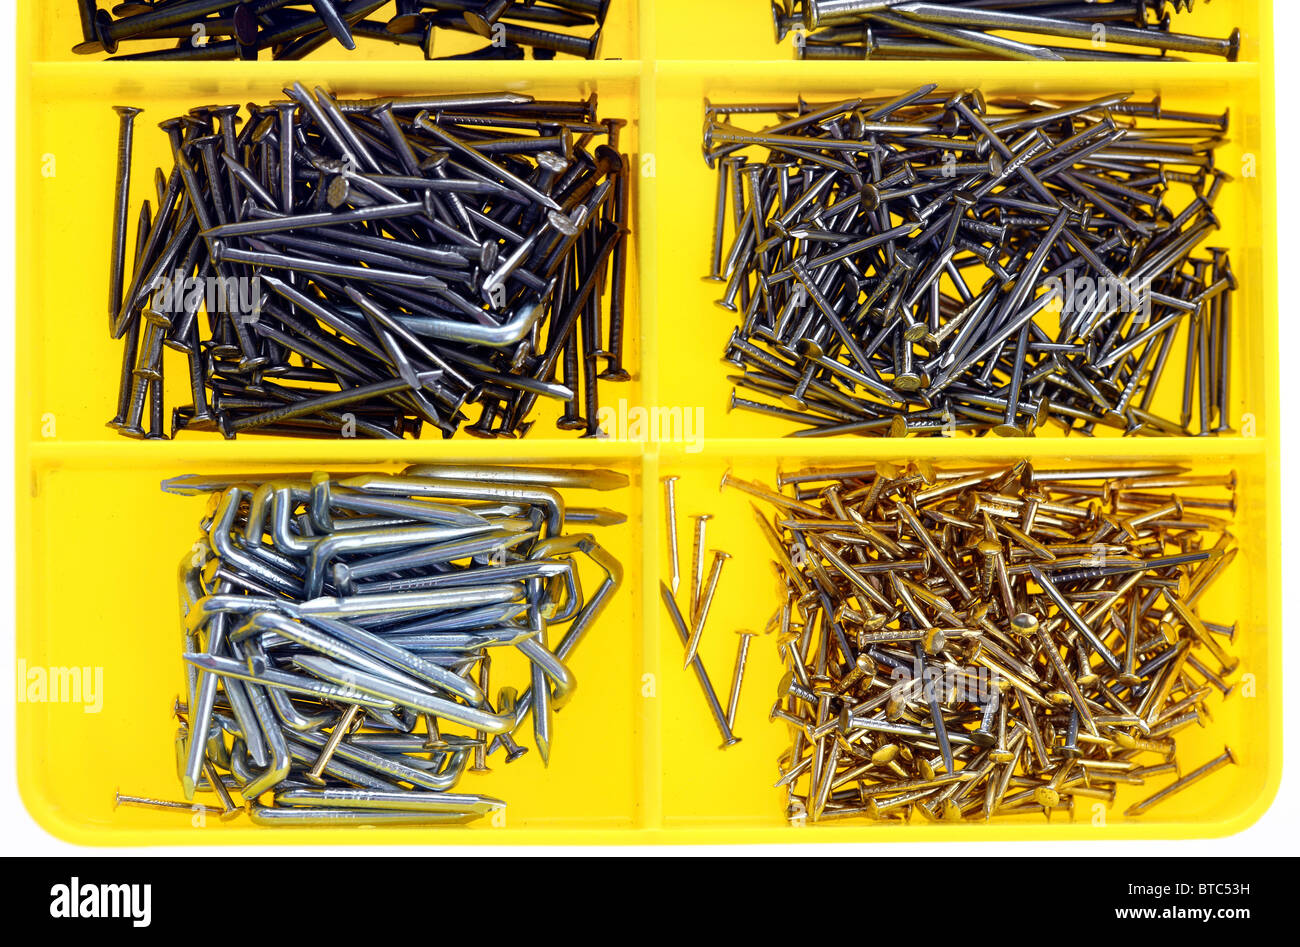 Tool box with different types of metal nails Stock Photo - Alamy